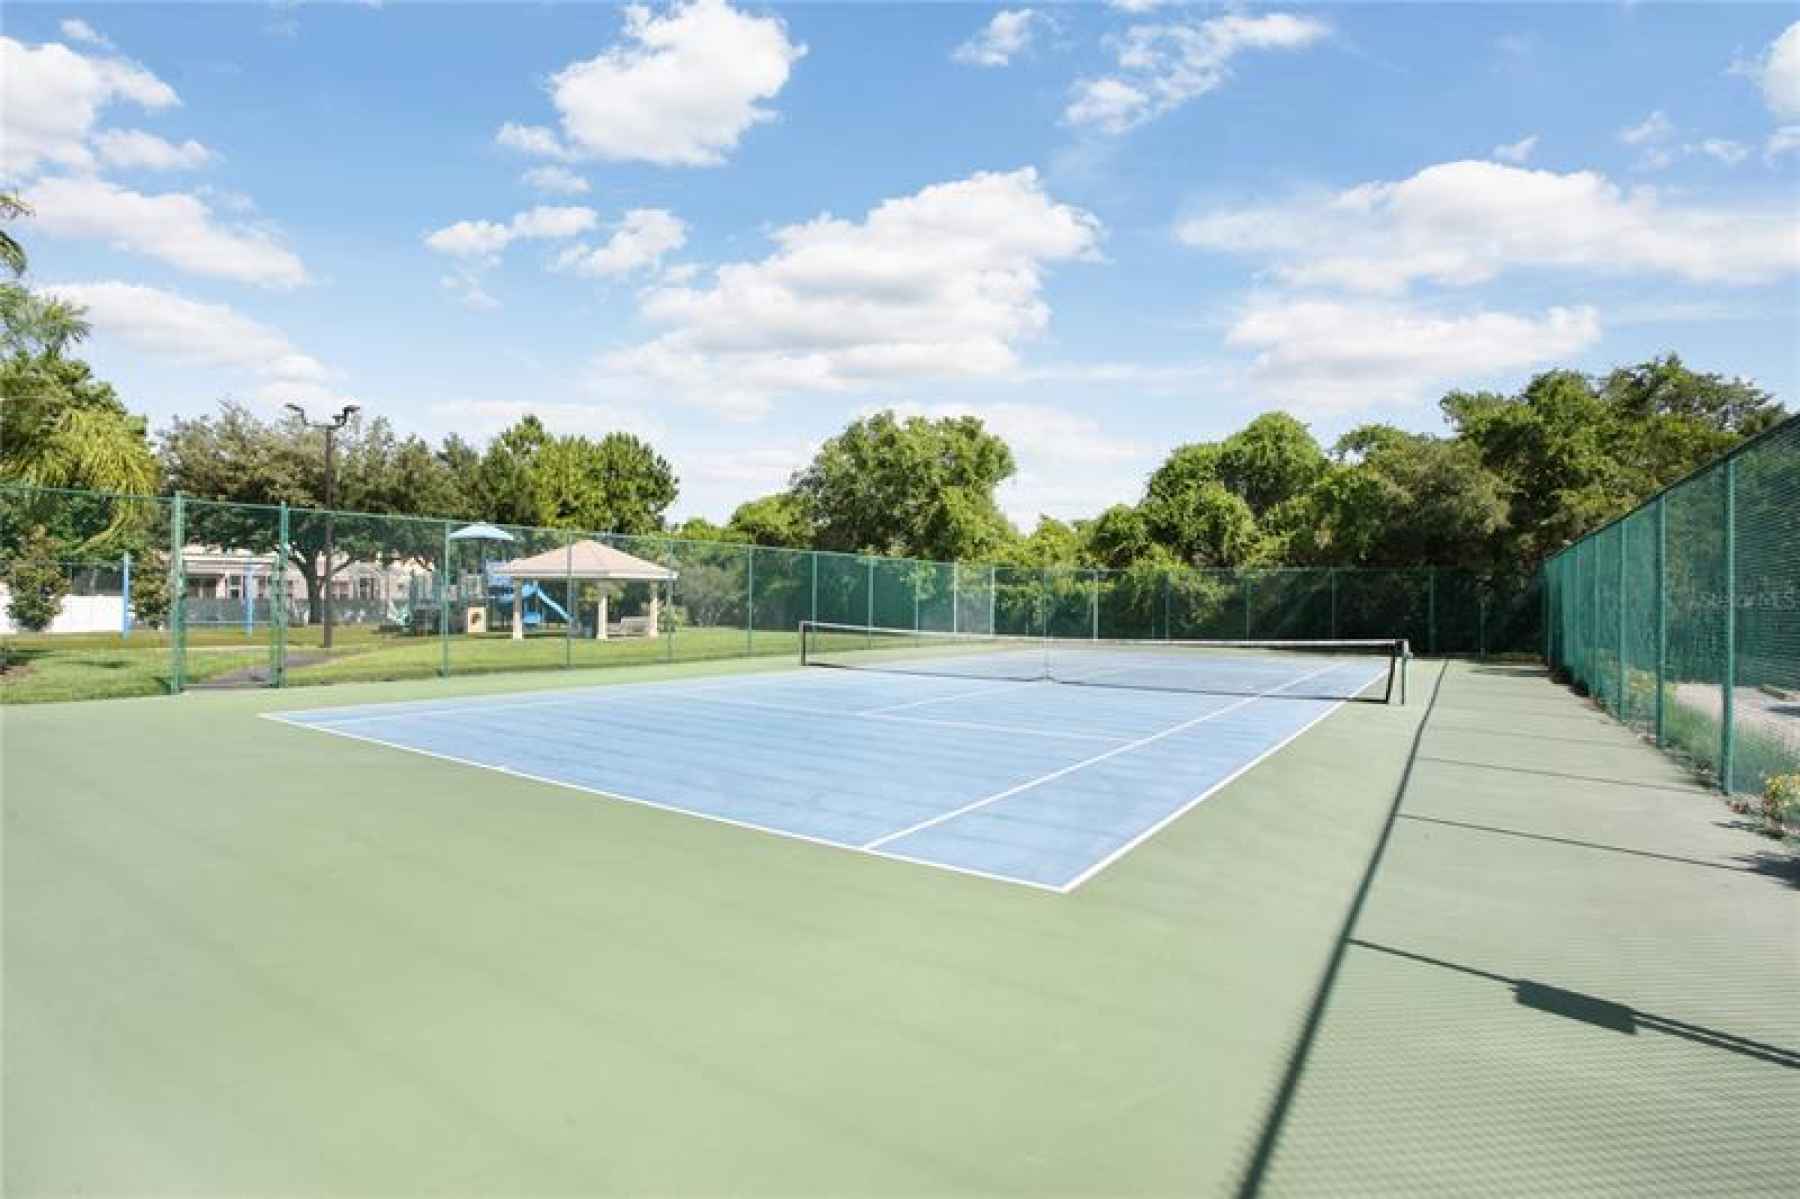 Here's your chance to improve that backhand, as you enjoy community tennis courts.